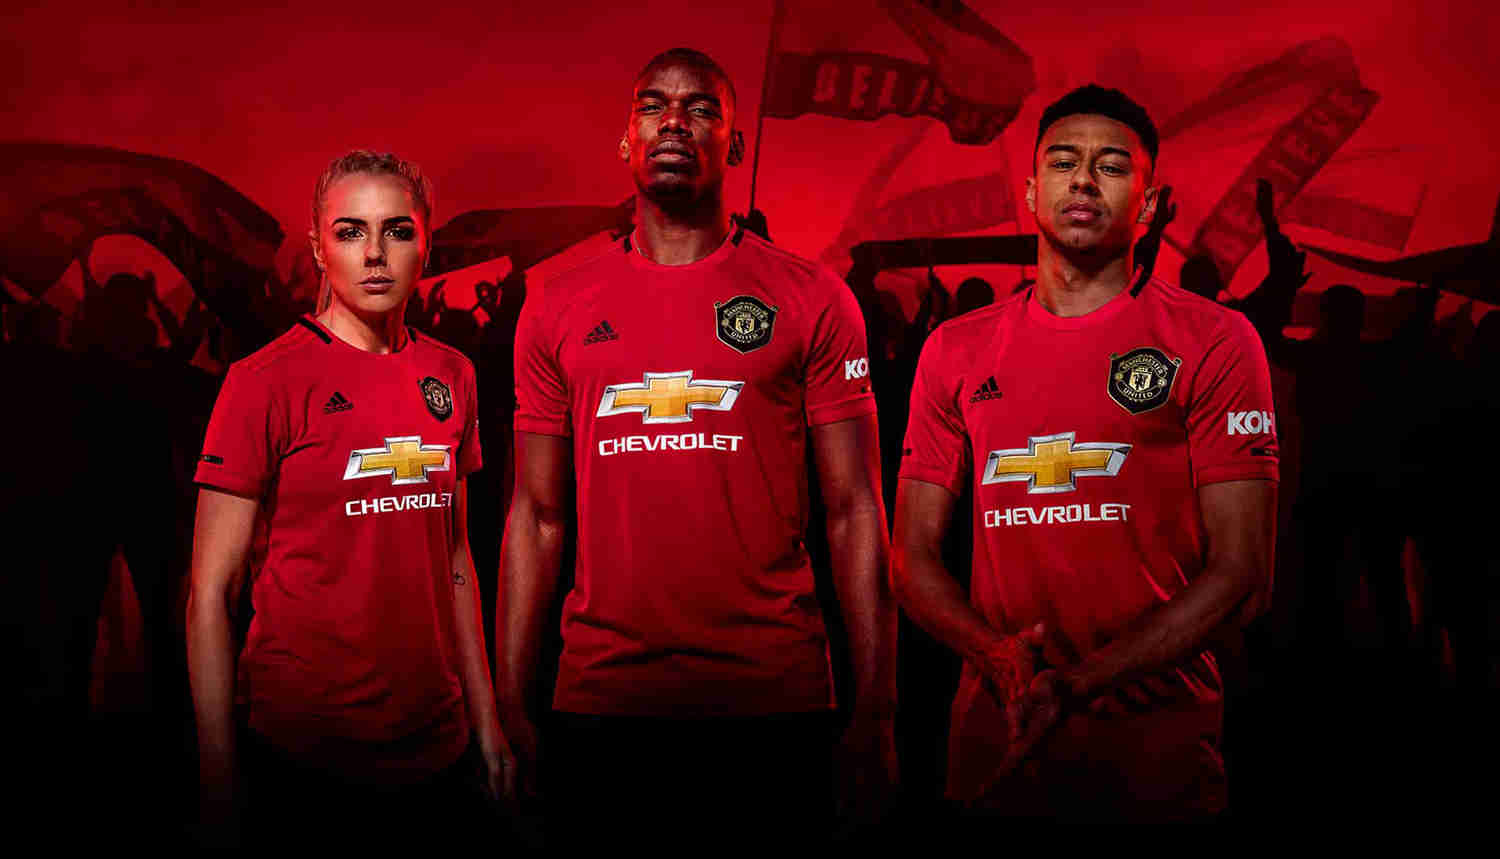 Adidas released Manchester United 2019/20 season home jersey